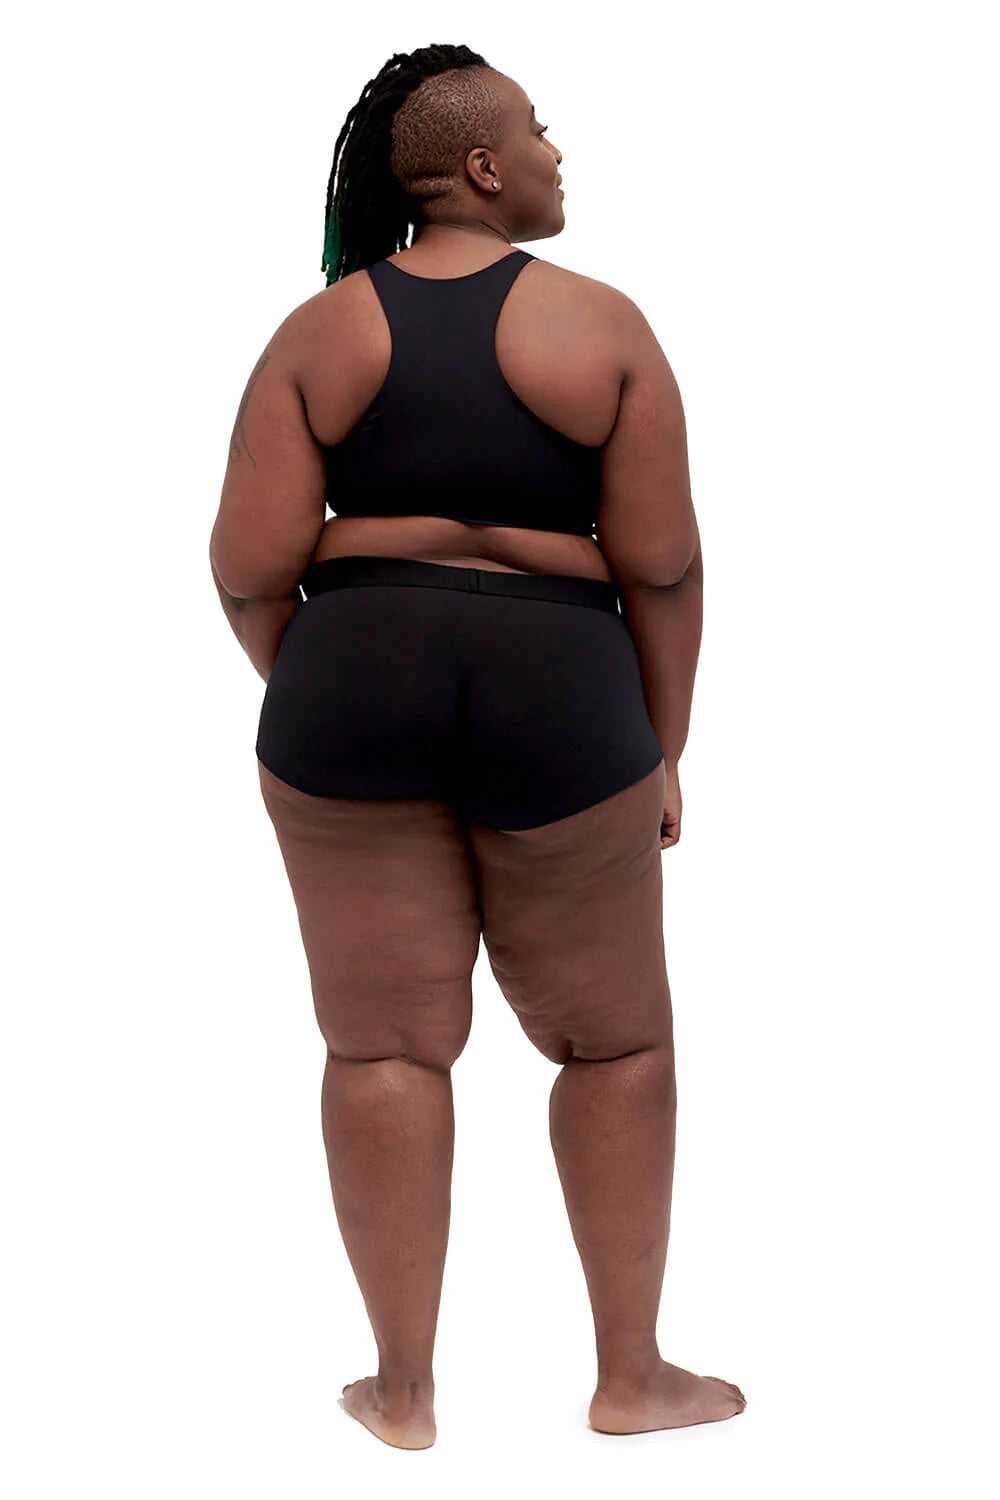 A model in black spandex shorts shows the rear view of the black Gentle Binding Compression Top.